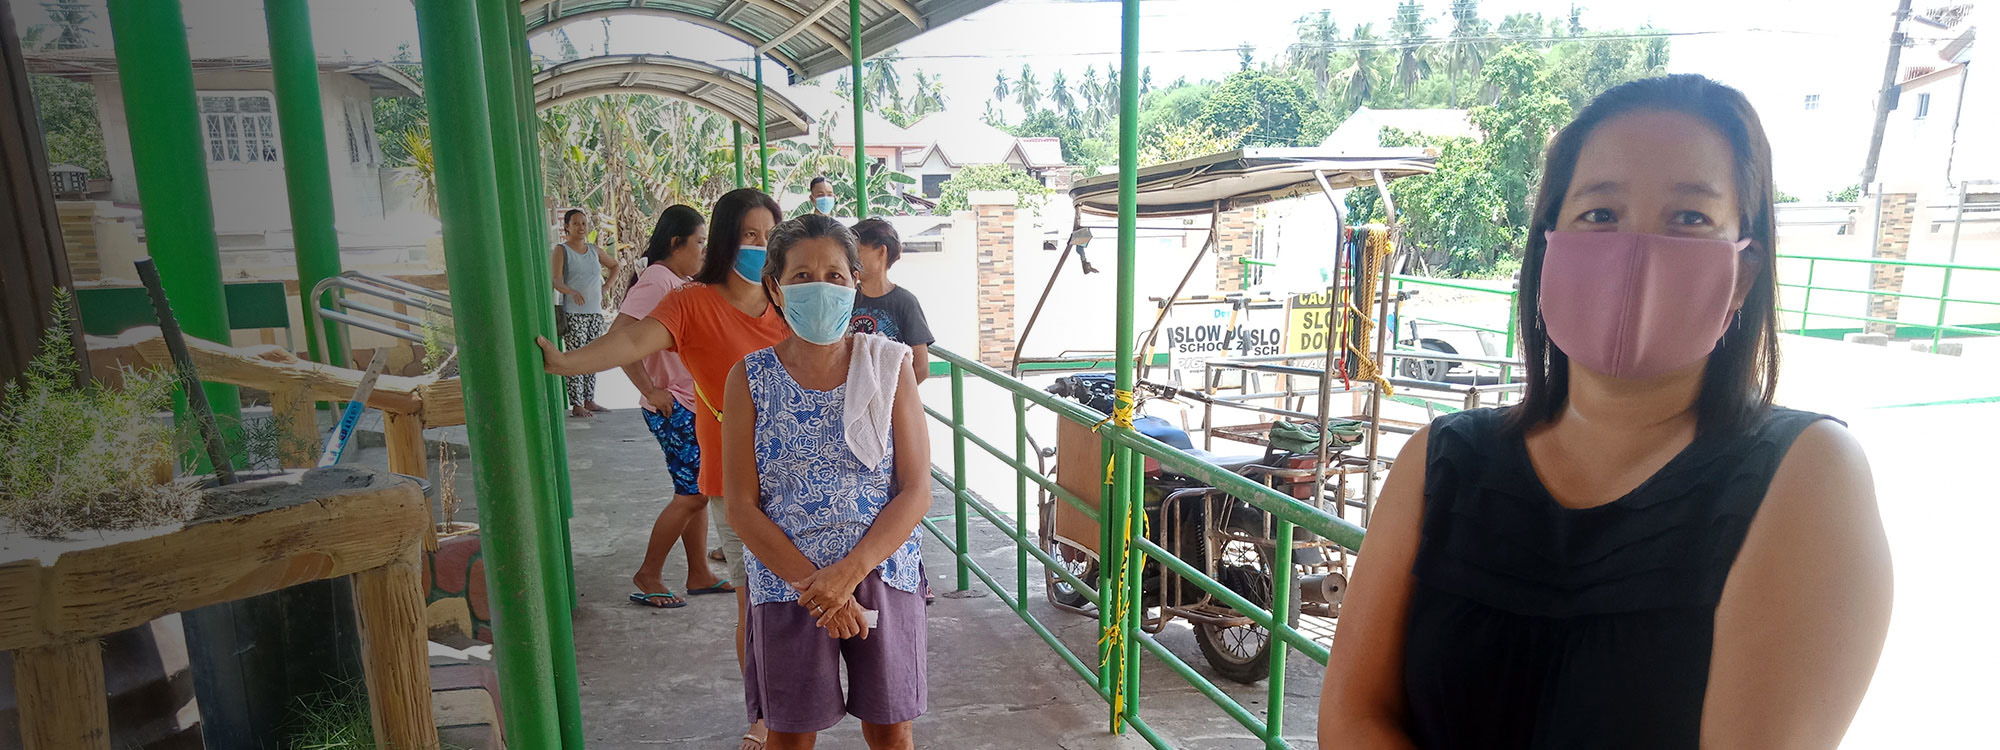 People queuing for aid in the Philippines socially distanced and wearing facemasks during the coronavirus pandemic